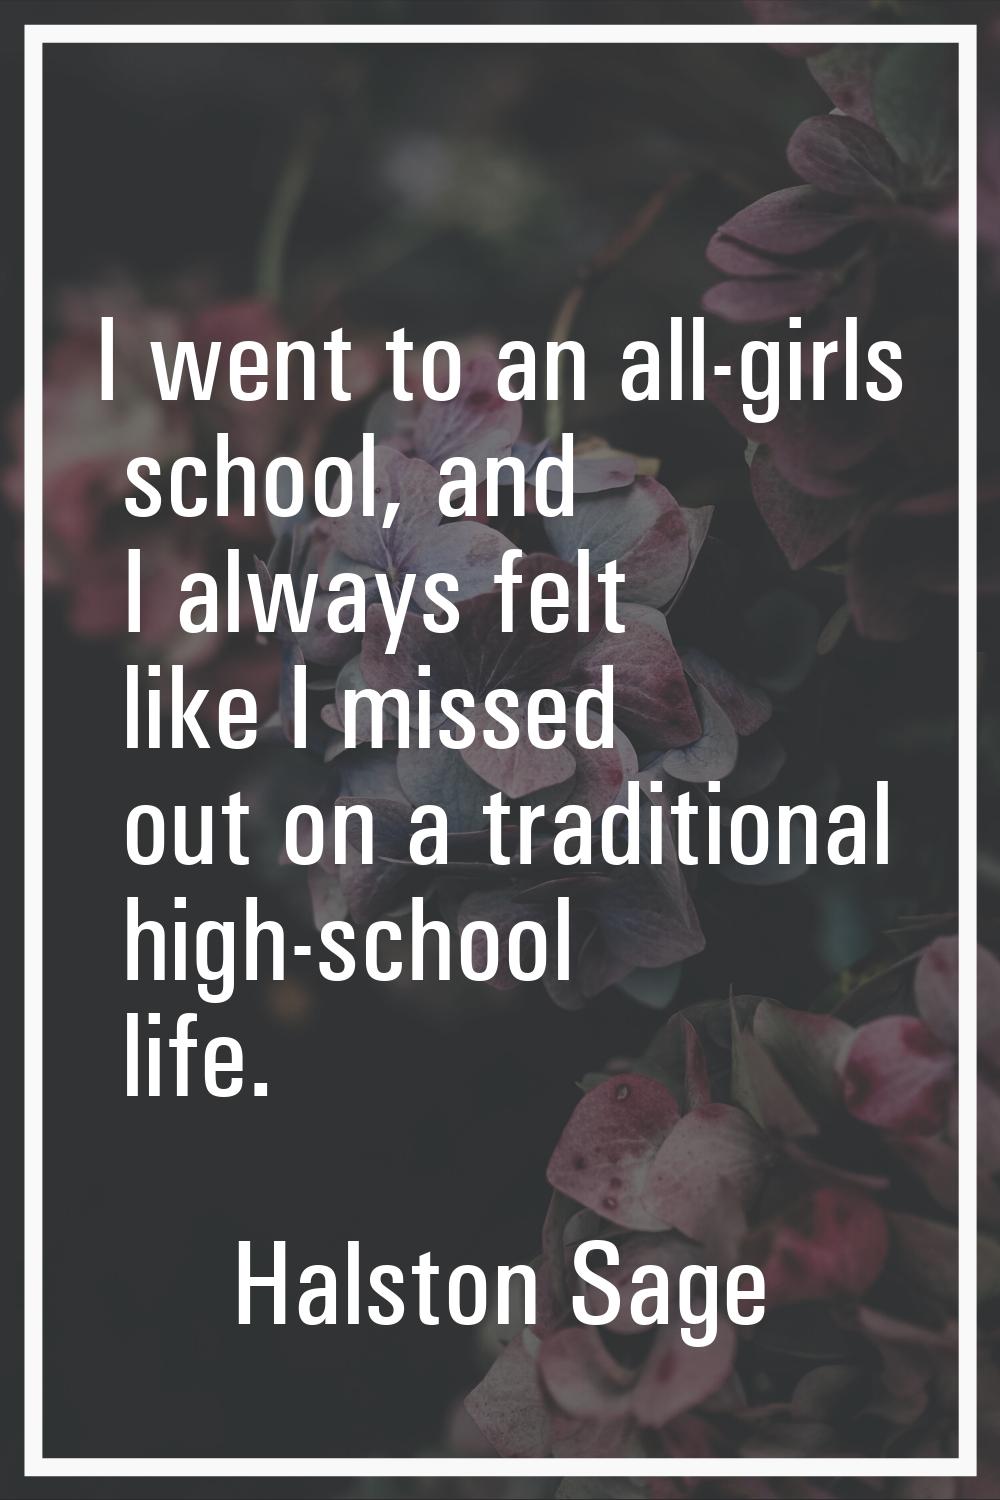 I went to an all-girls school, and I always felt like I missed out on a traditional high-school lif